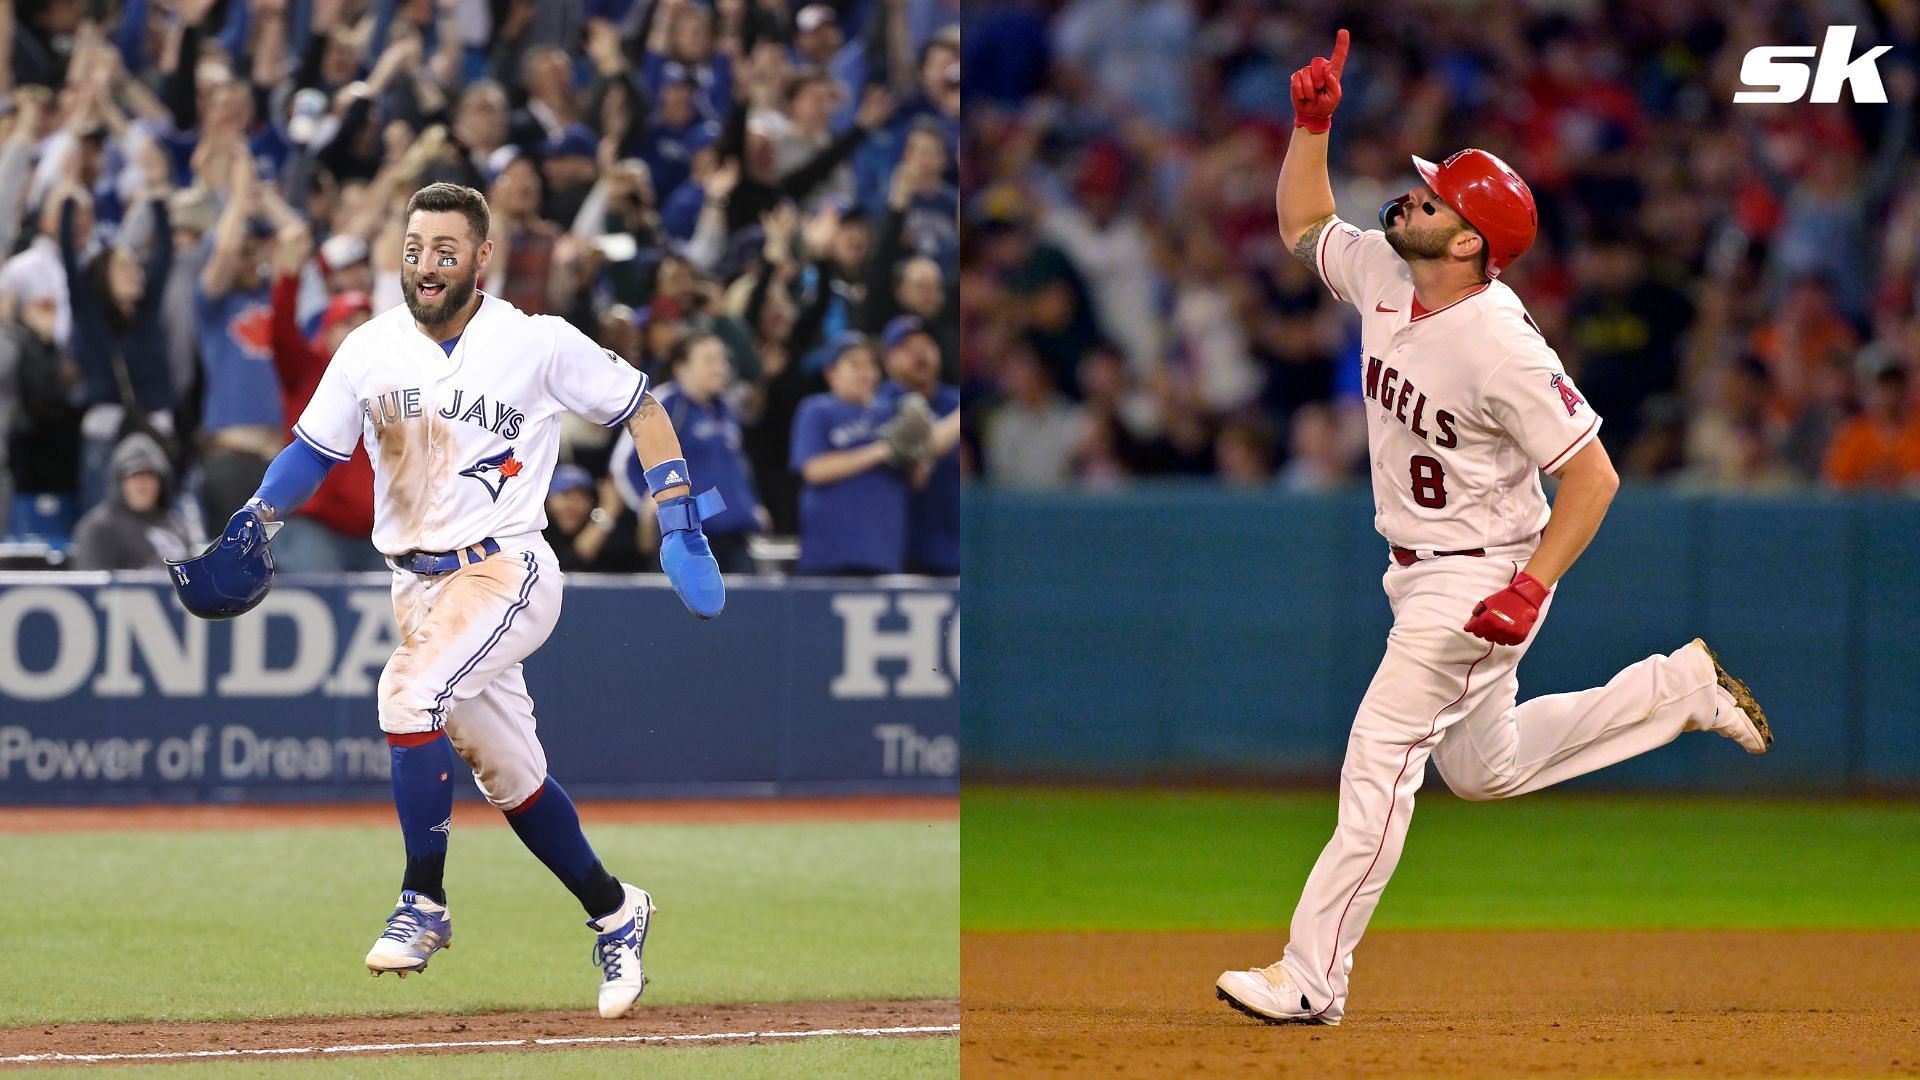 Veteran Sluggers Mike Moustakas and Kevin Pillar released from camp amid performance struggles, uncertainty hangs over team